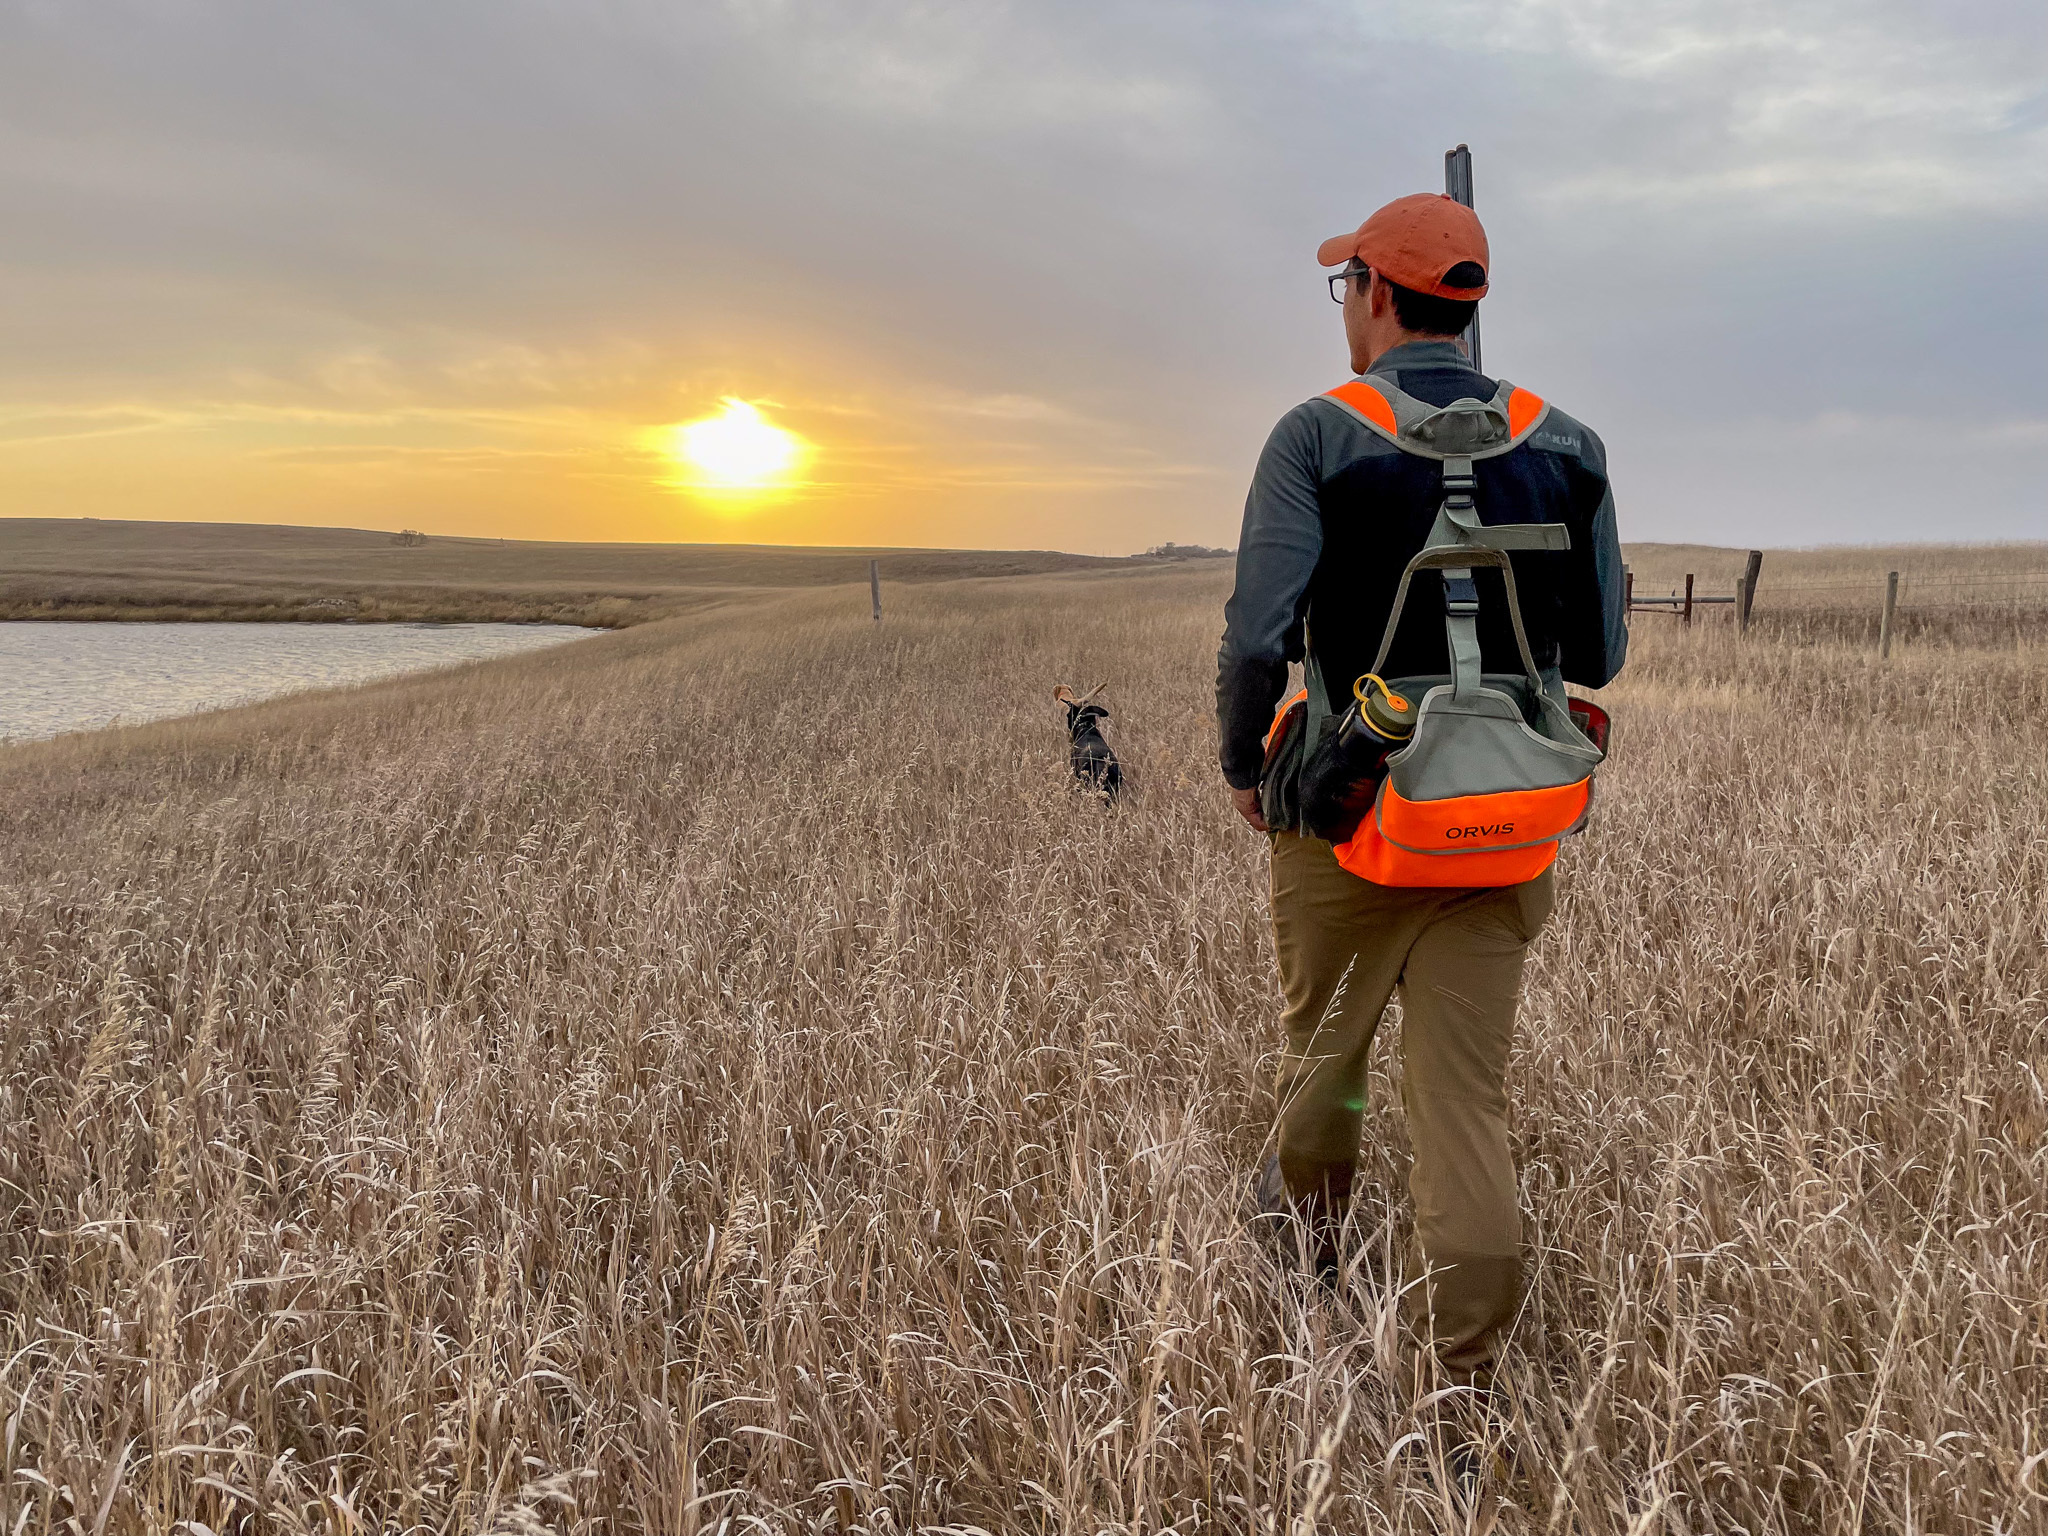 A hunter tests an upland vests in a pheasant field.